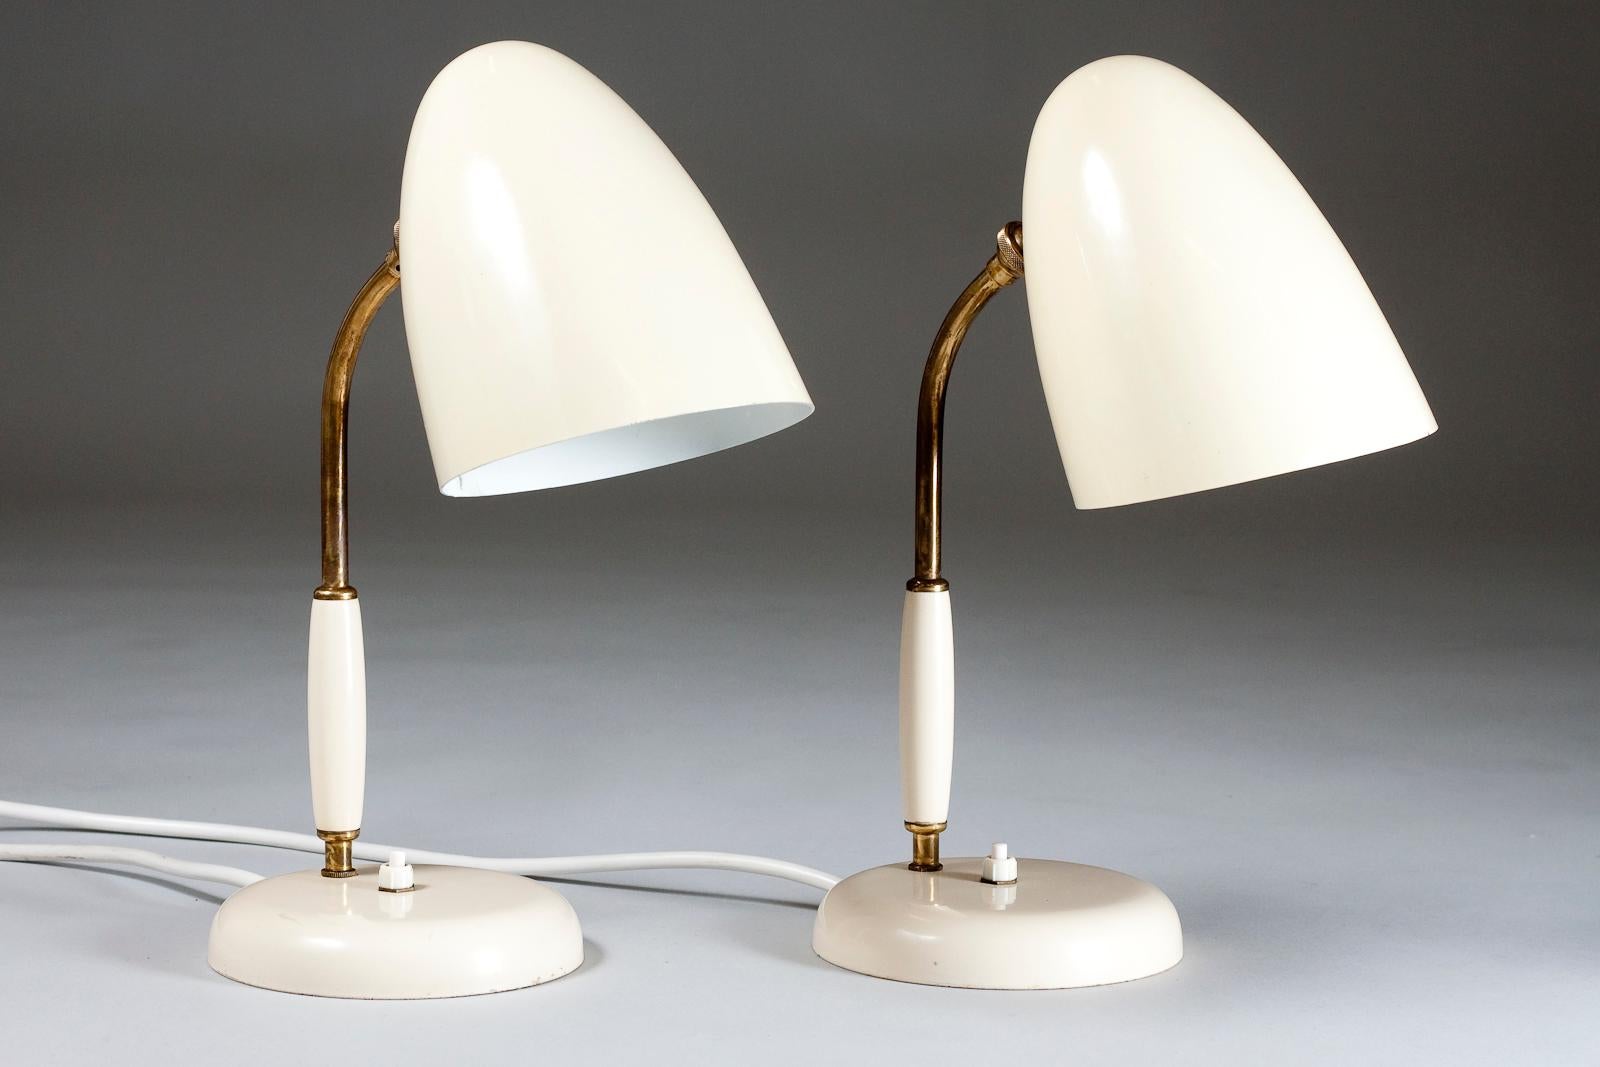 Pair of beautiful cream white Finnish Mid-Century Modern table lamps produced by Stockmann Oy.